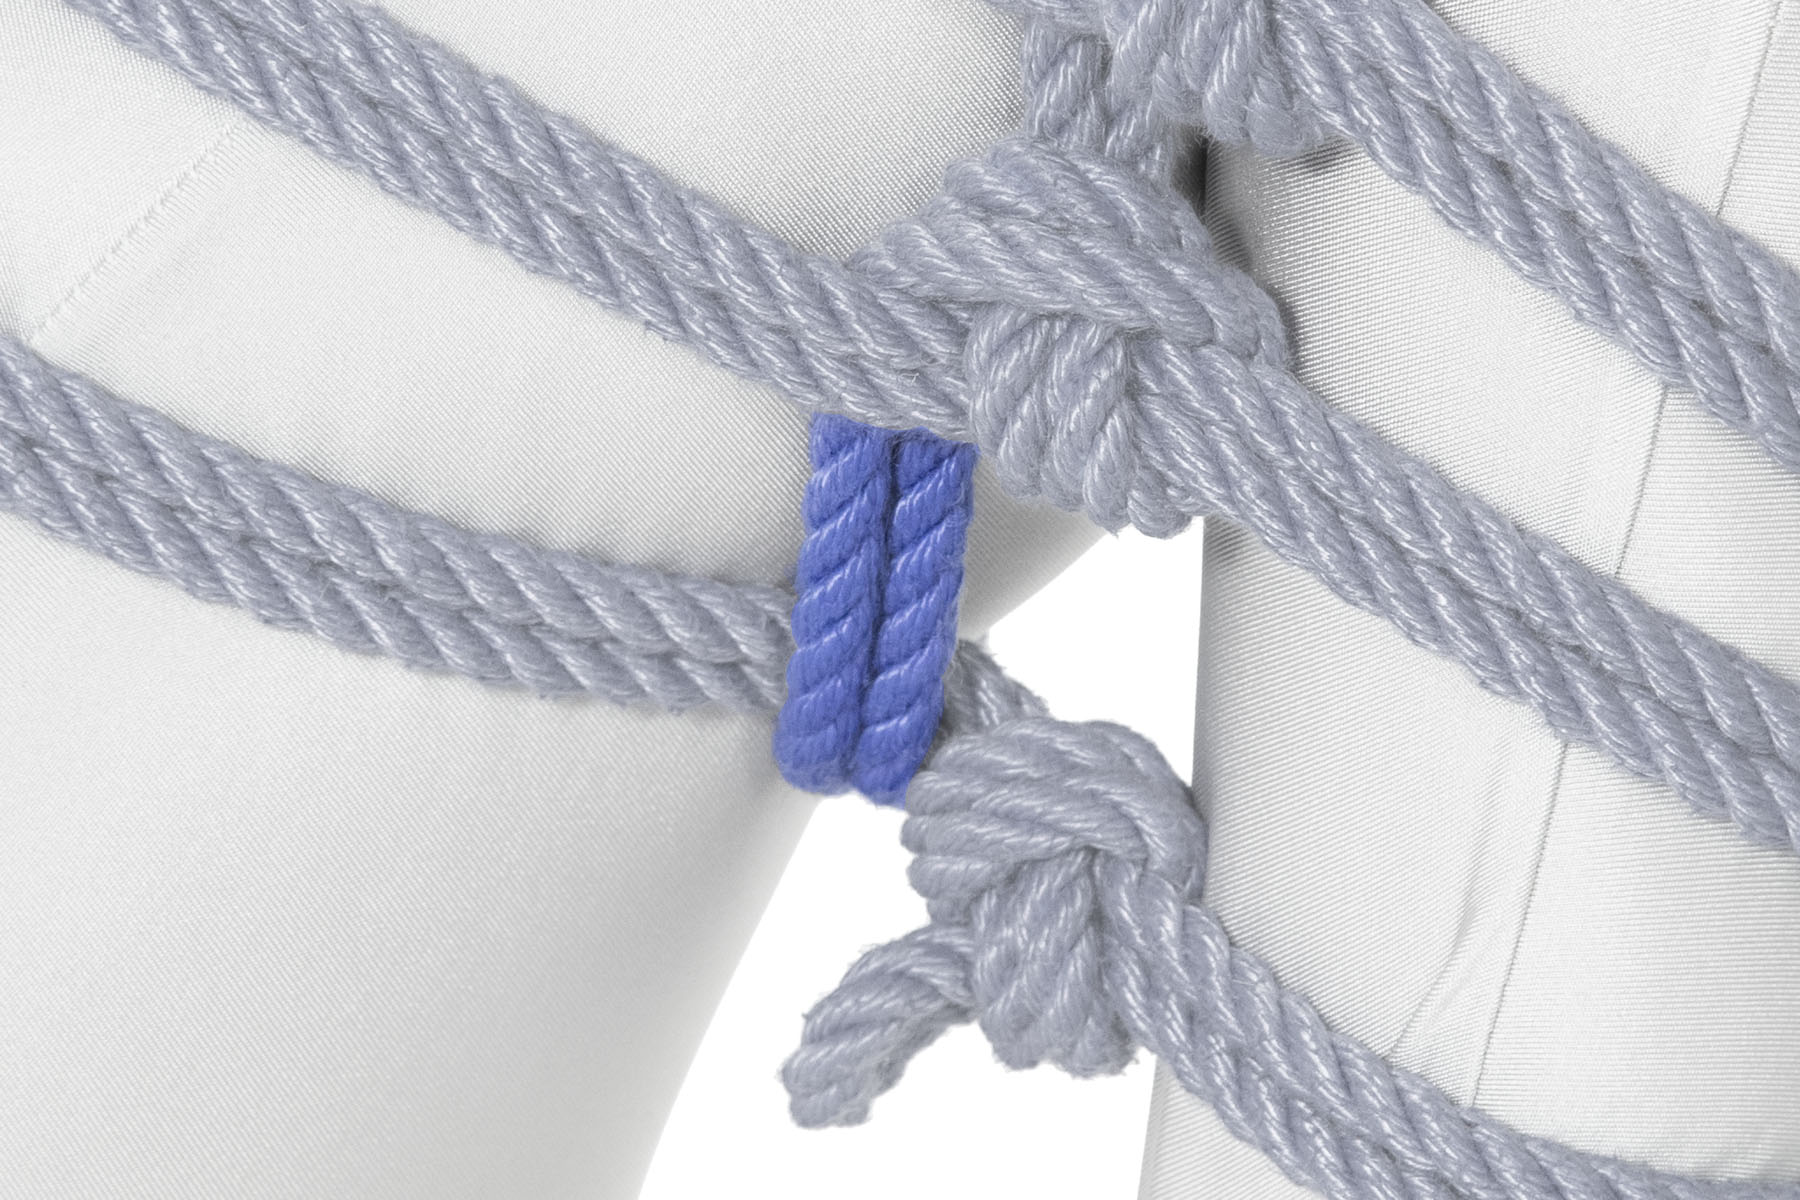 The rope crosses over the lowest wrap, right next to the single column tie. It turns inward and goes between the thigh and calf.